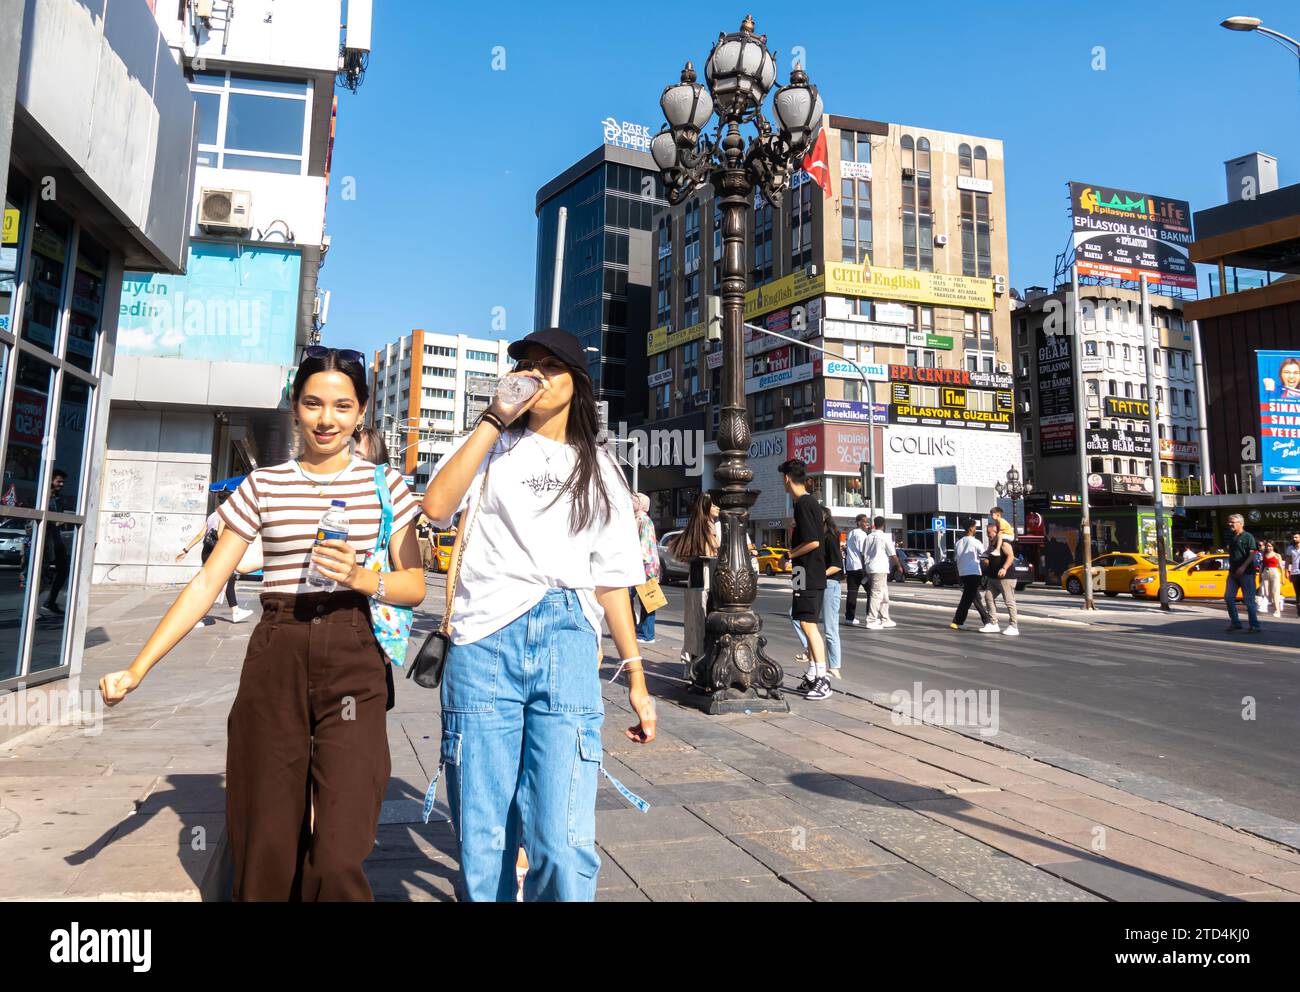 Young Turkish women walk the streets while drinking from a bottle of water, central Ankara Turkey Stock Photo